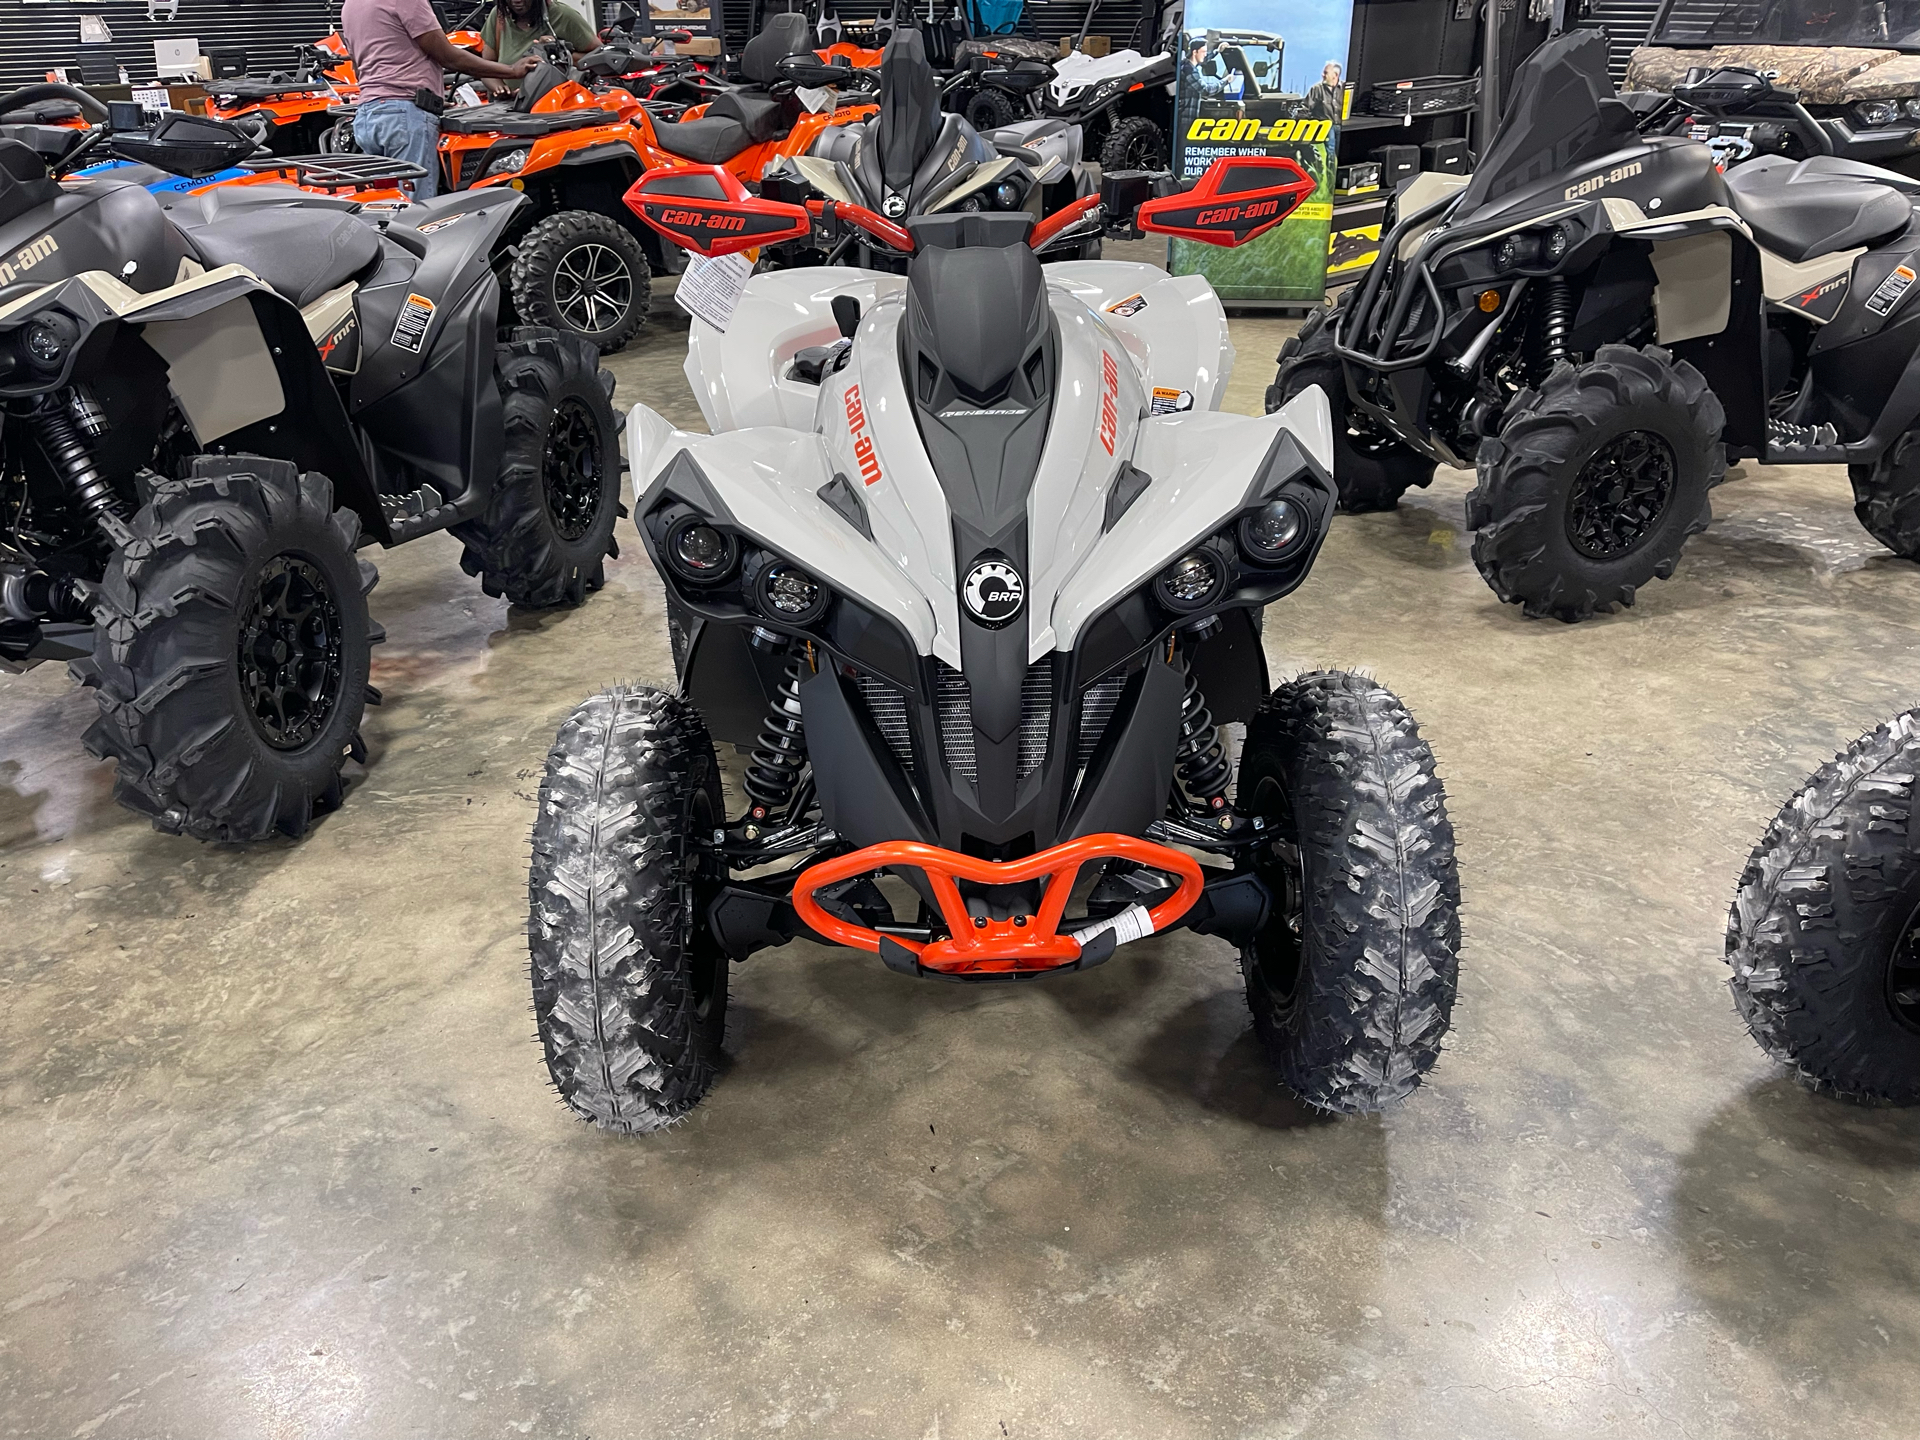 2022 Can-Am Renegade X XC 1000R in Leland, Mississippi - Photo 2